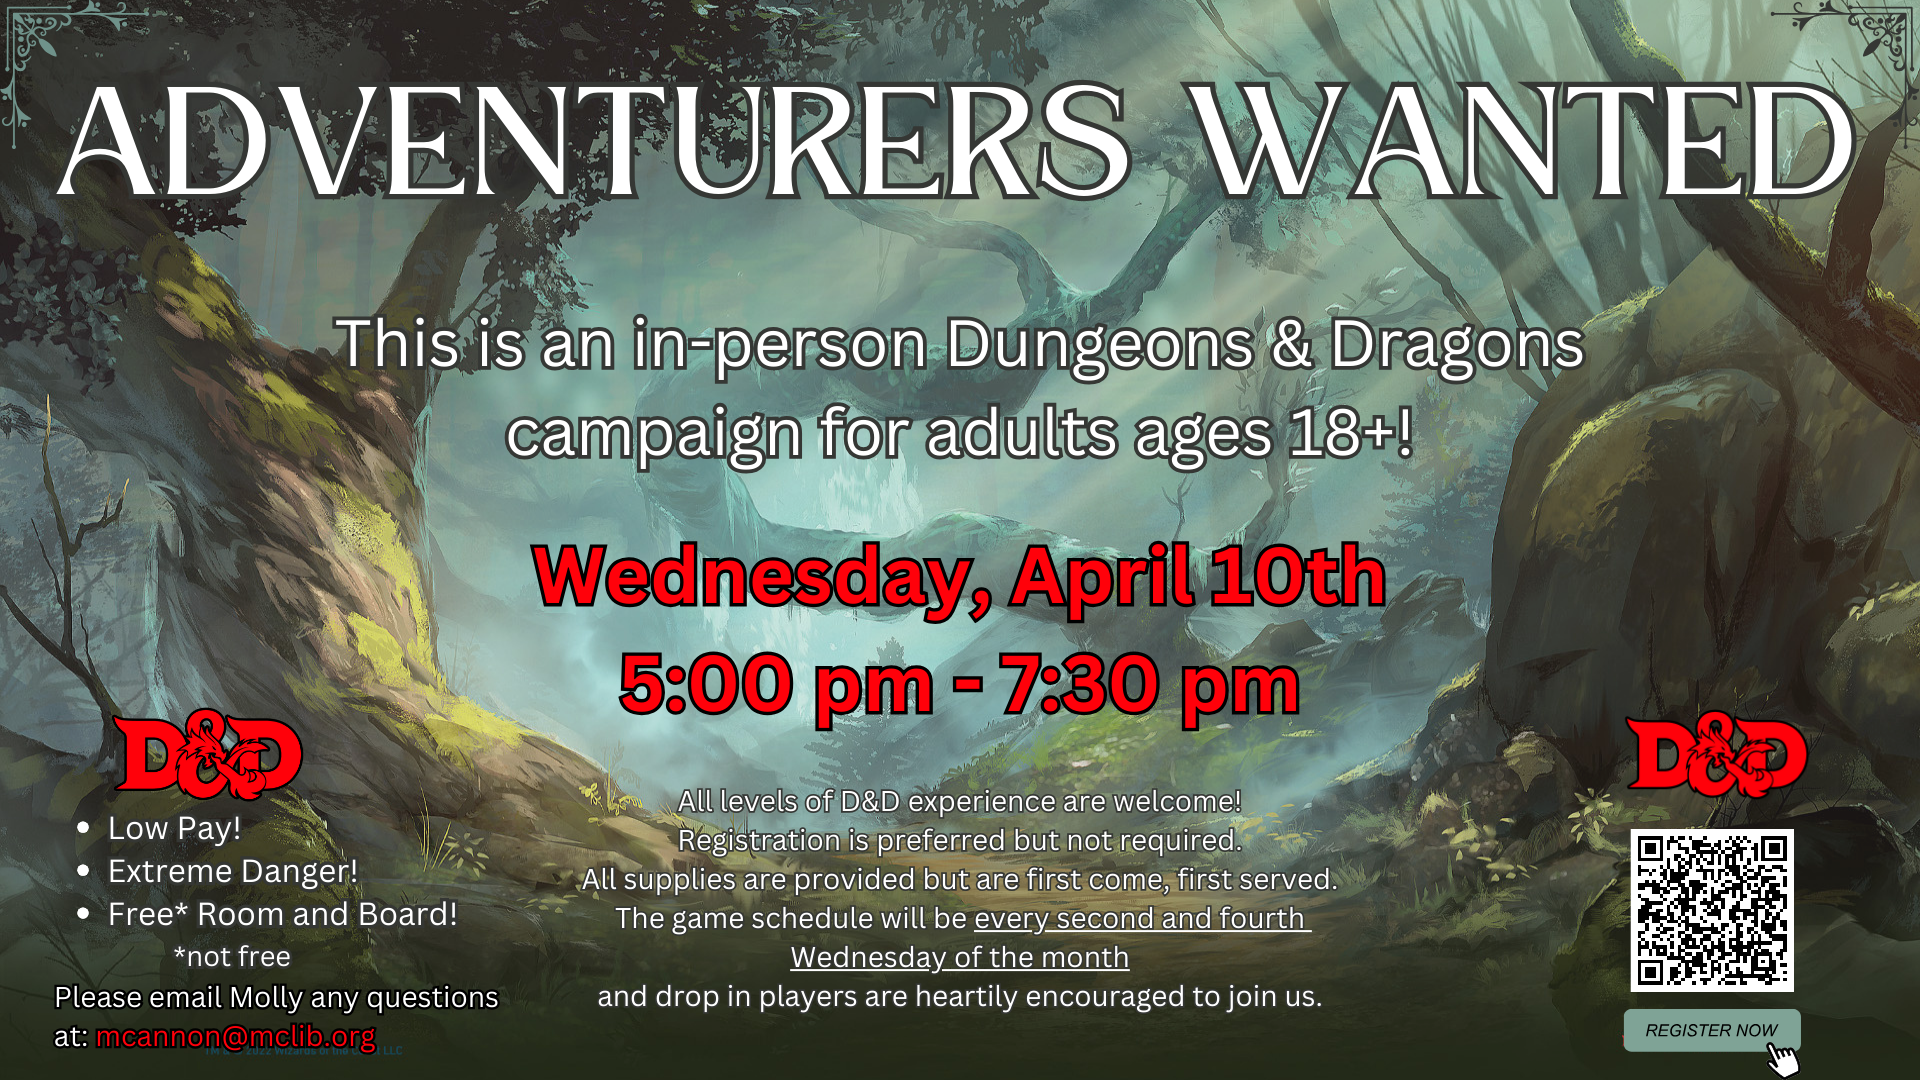 Adventurers wanted! Adult D&D, Wednesday, April 10, 5-7:30 pm